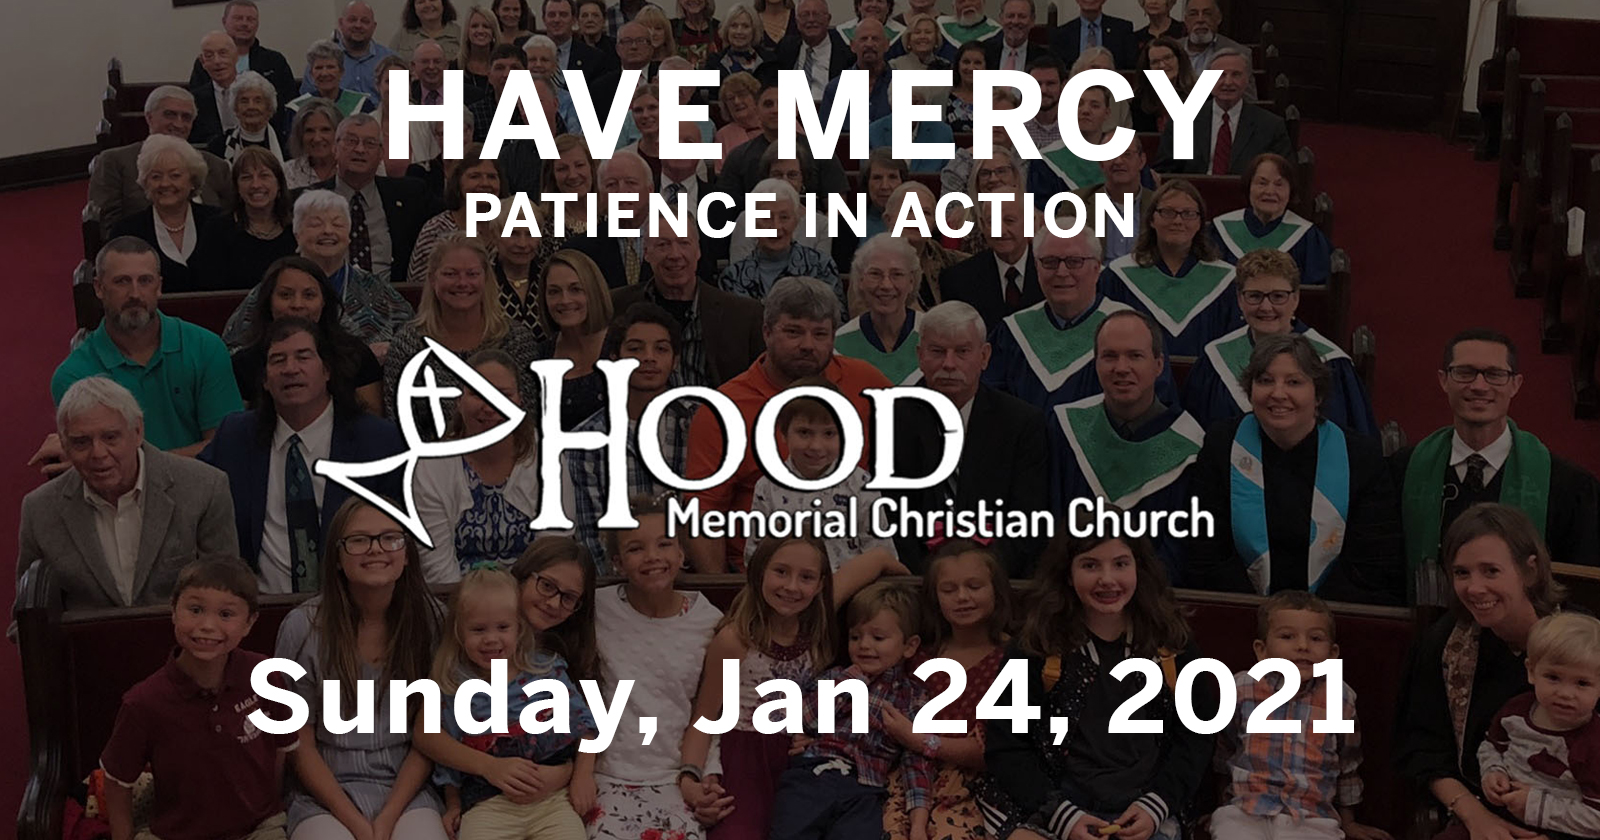 Have Mercy: Patience in Action